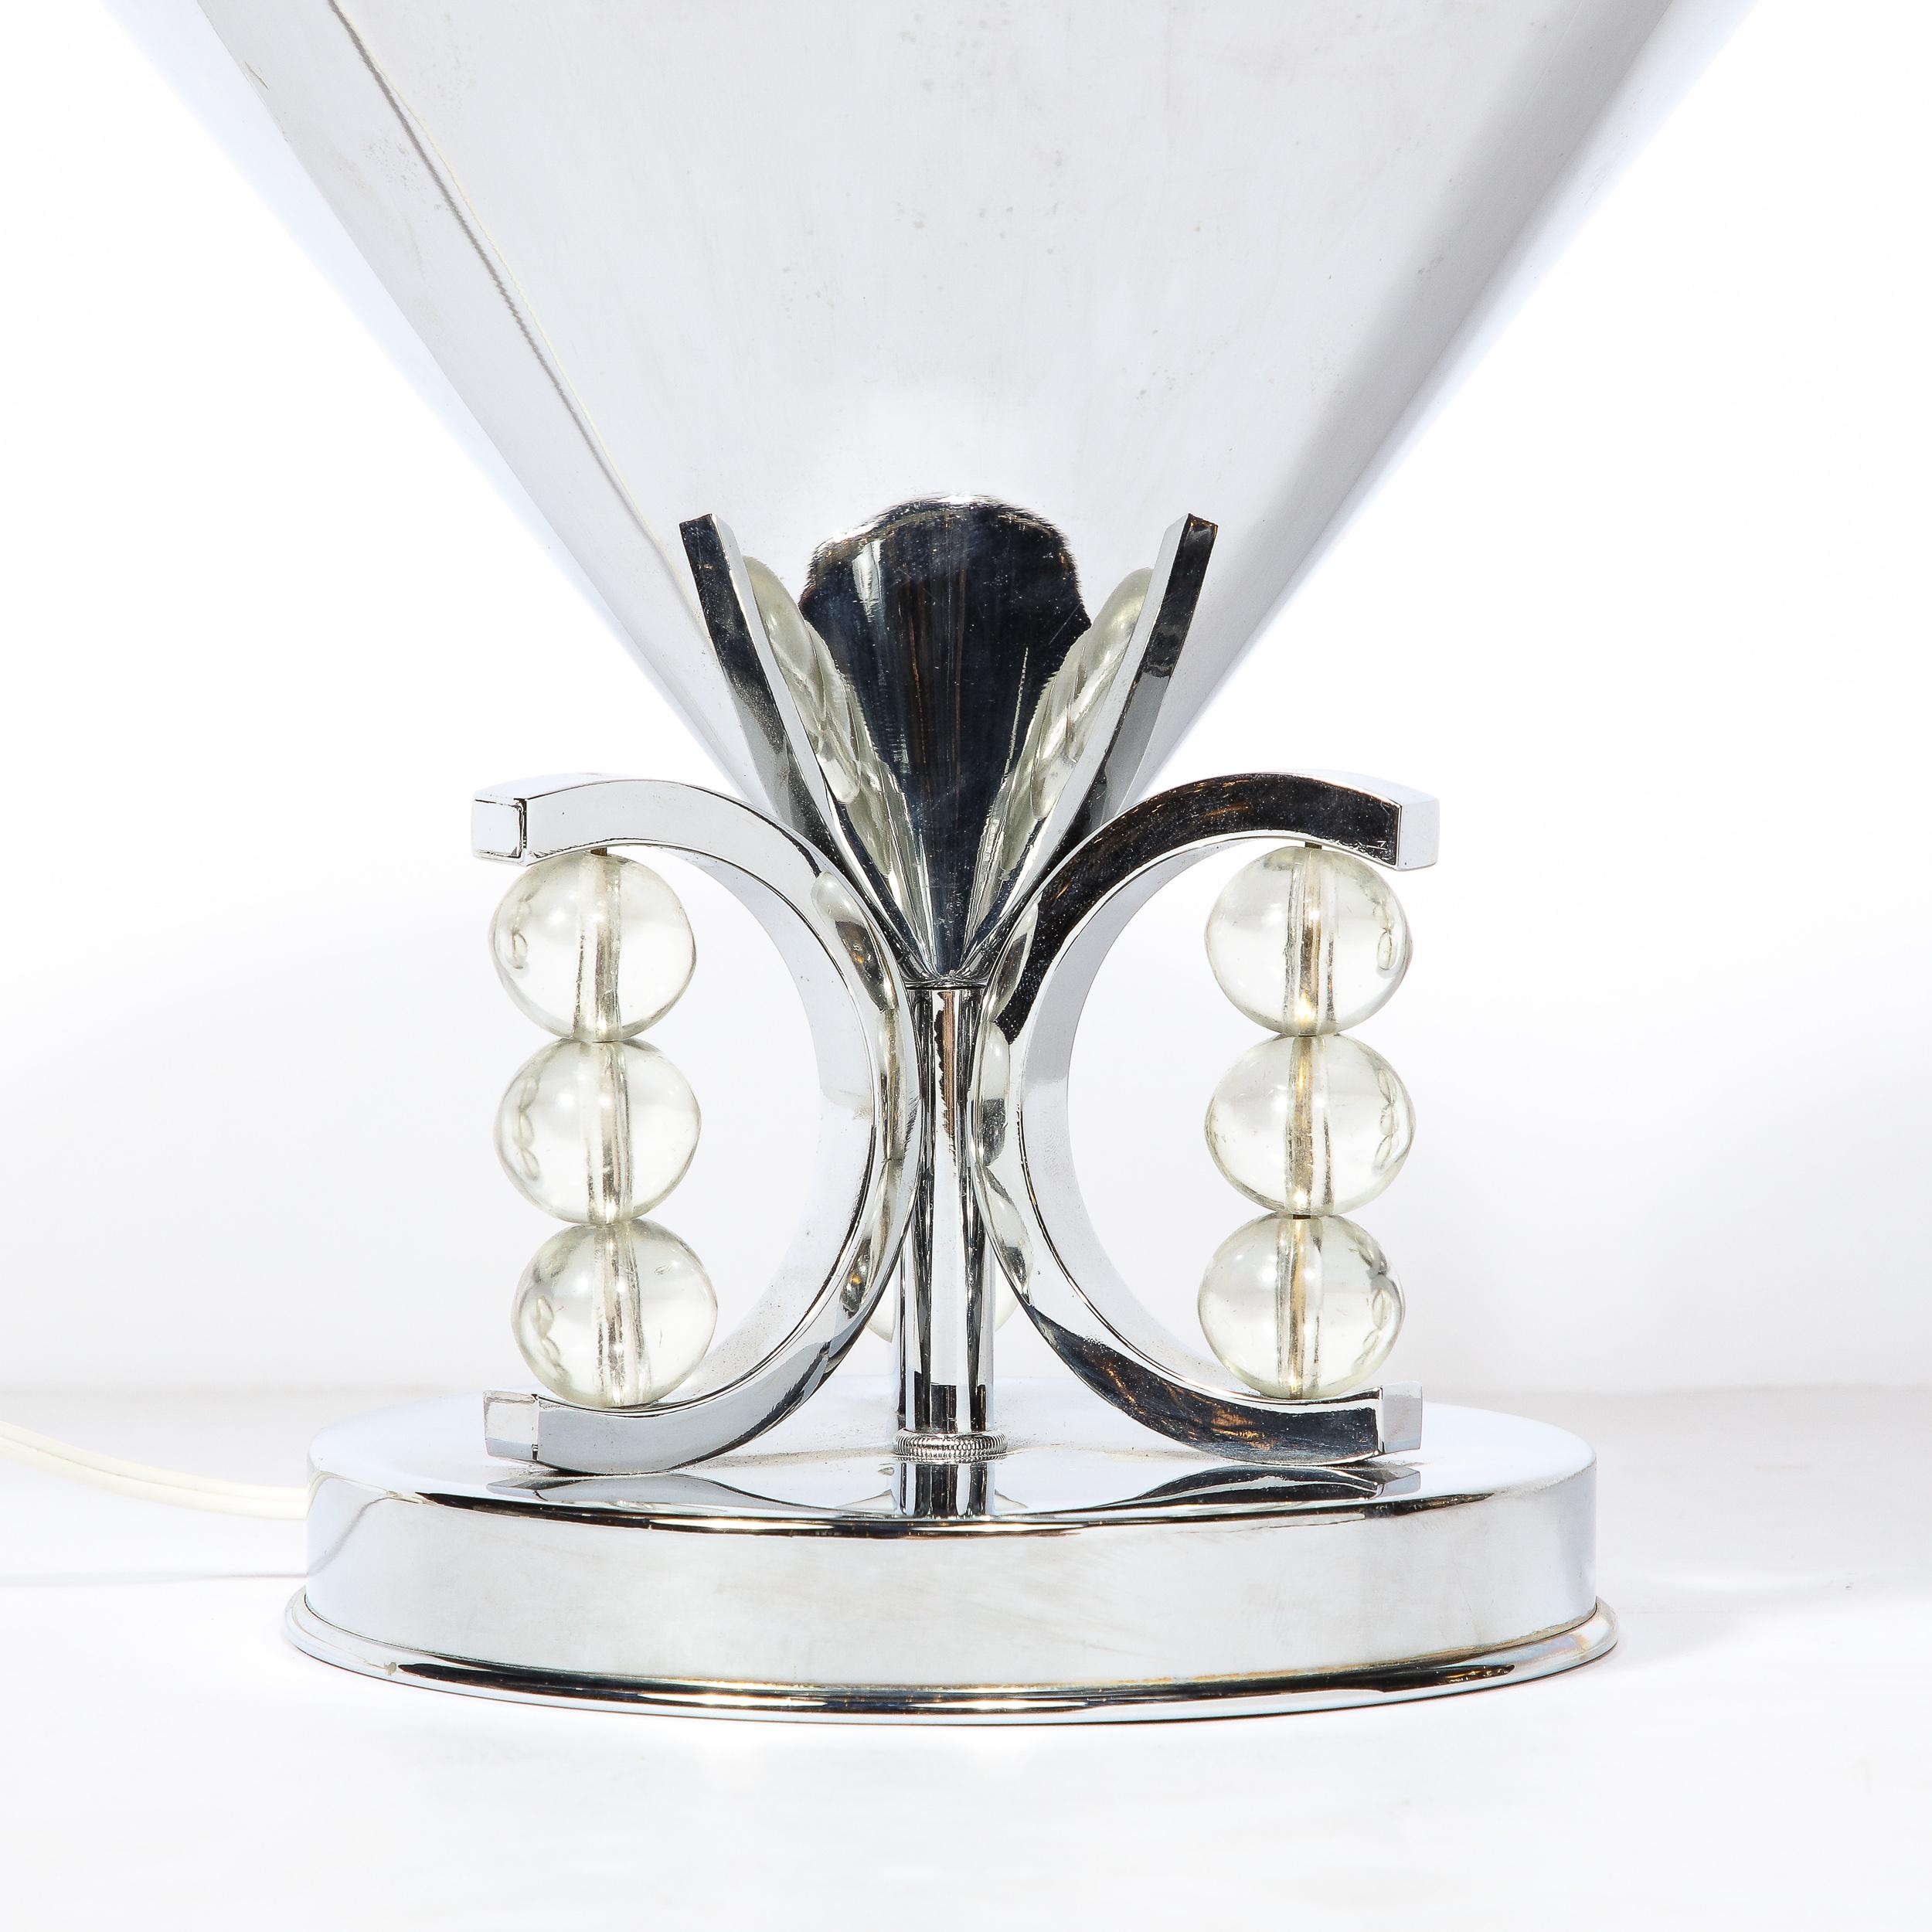 Mid-20th Century Art Deco Conical Uplight Table Lamp in Chrome with Stacked Glass Ball Detailing For Sale